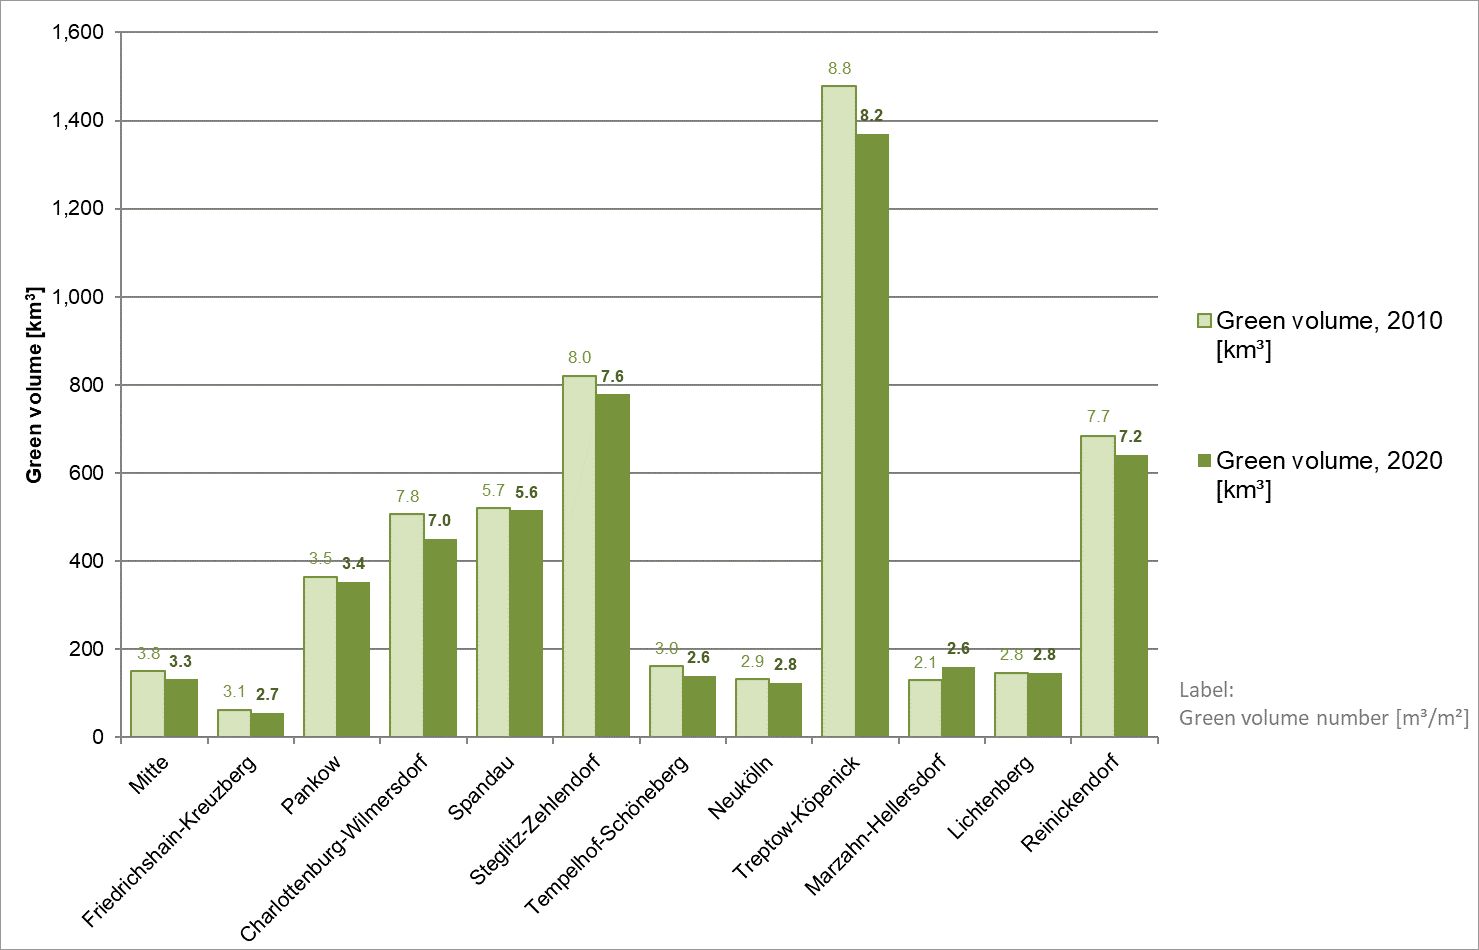 Enlarge photo: Fig. 7: Green volume and green volume number of Berlin’s 12 boroughs in 2010 and 2020 